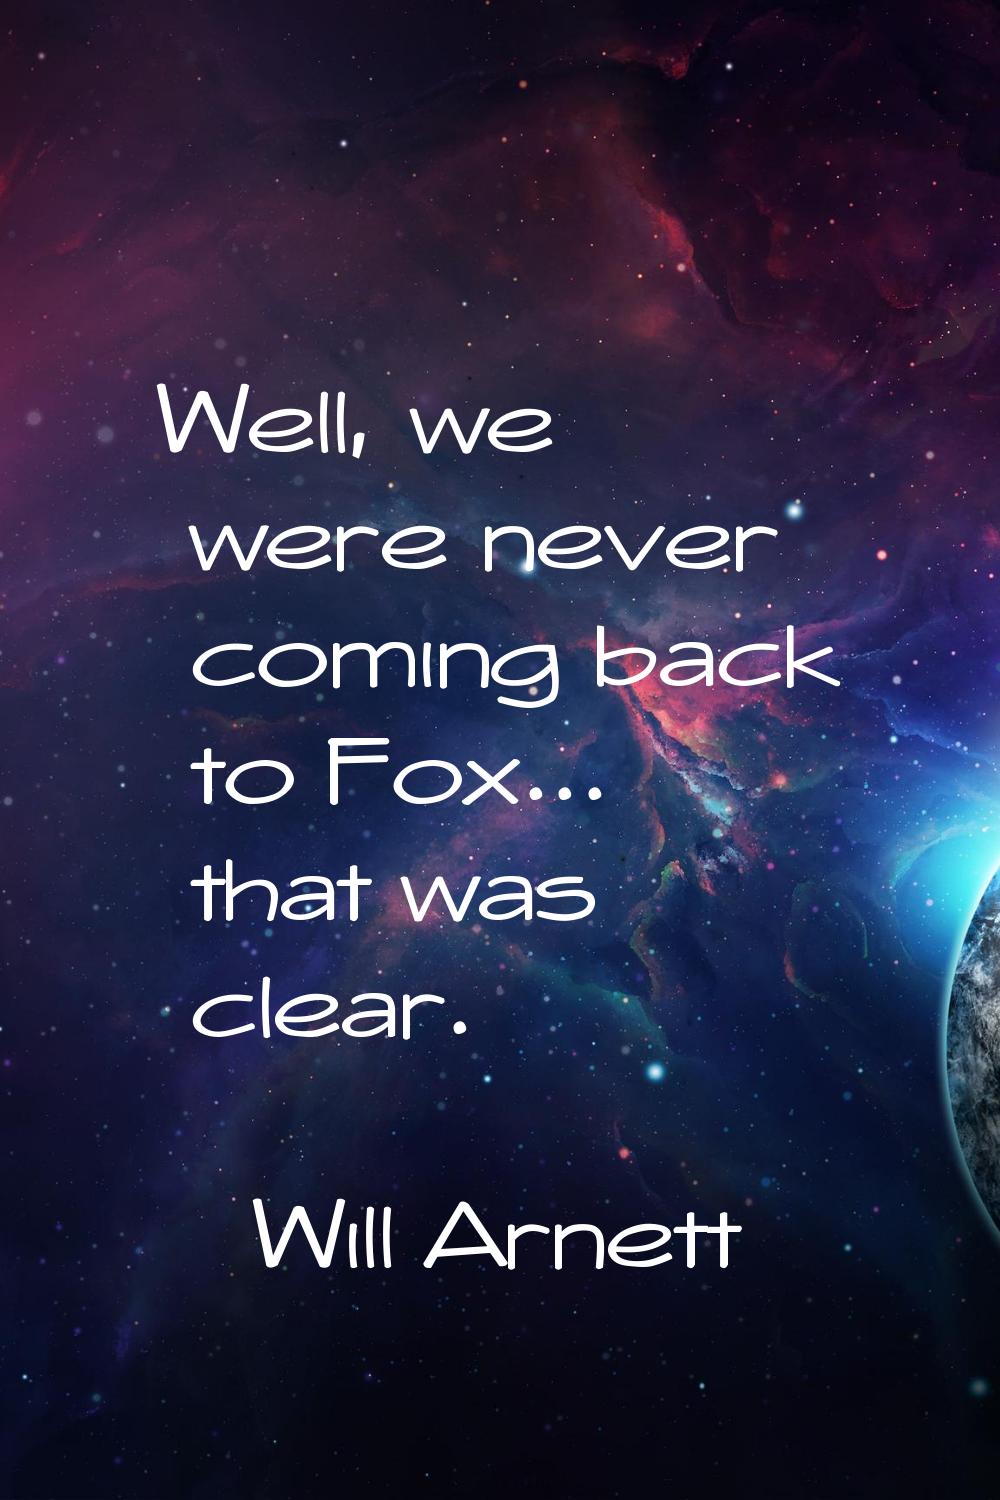 Well, we were never coming back to Fox... that was clear.